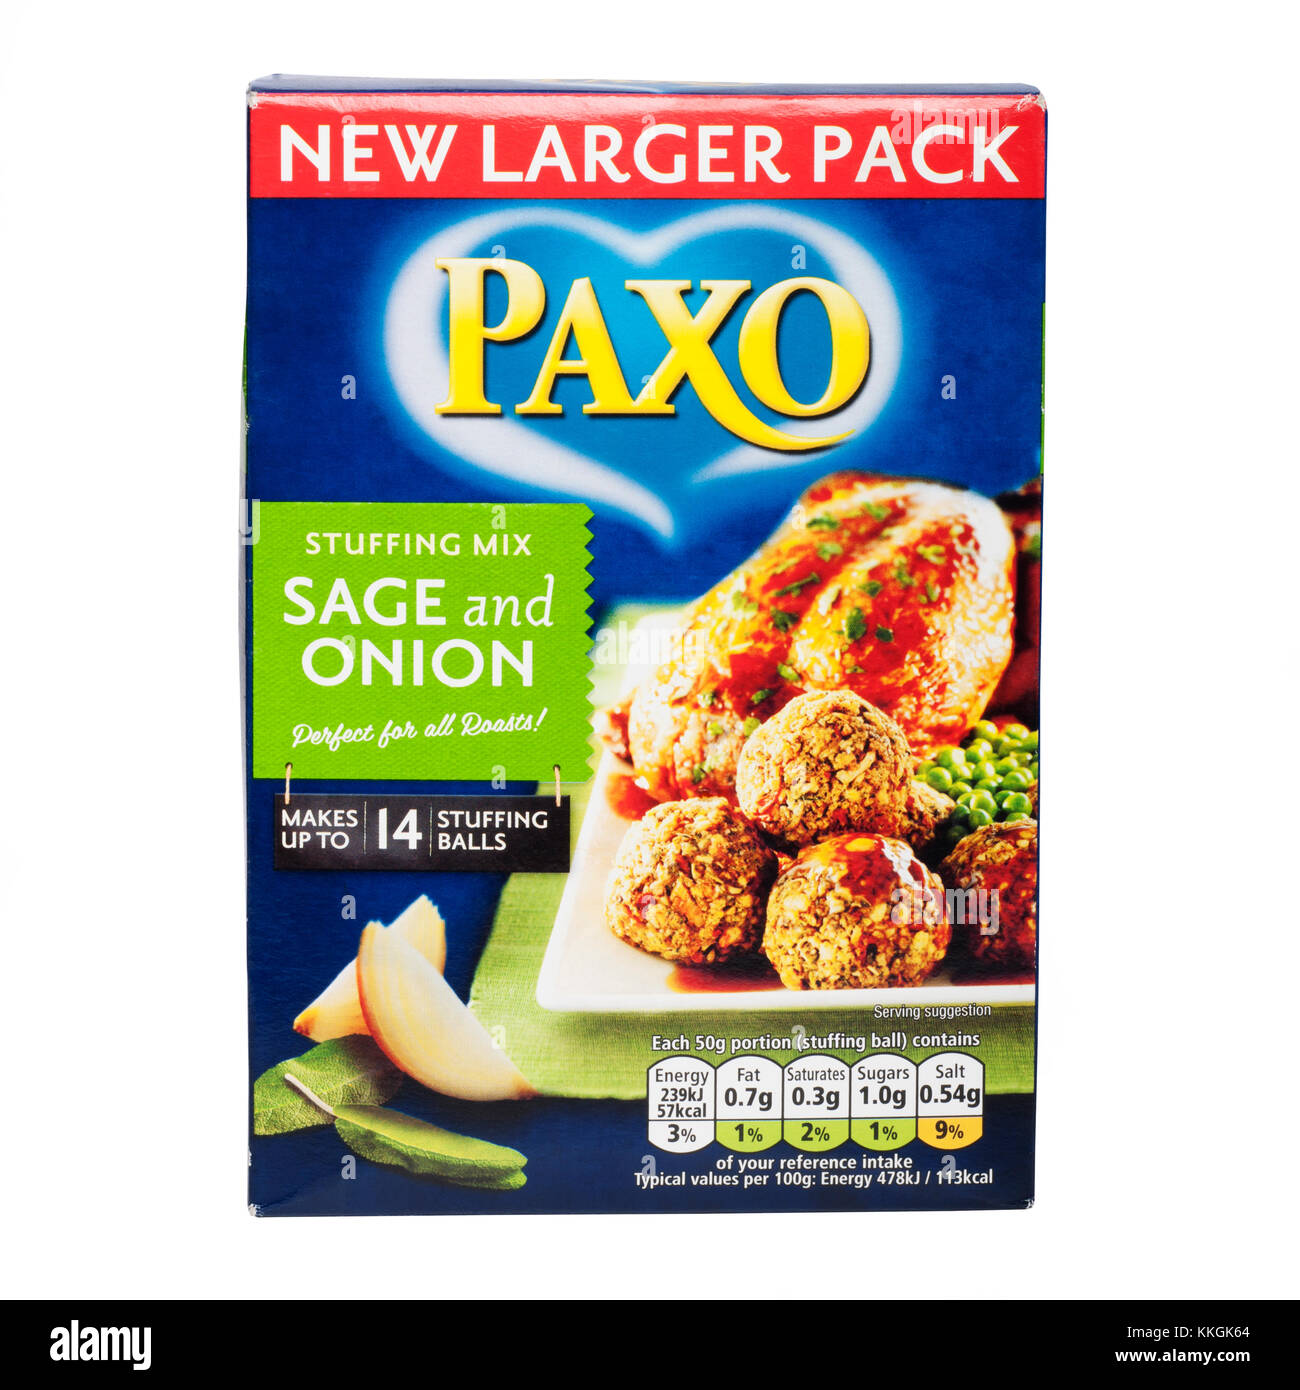 Paxo stuffing mix with sage & onion on a white background Stock Photo